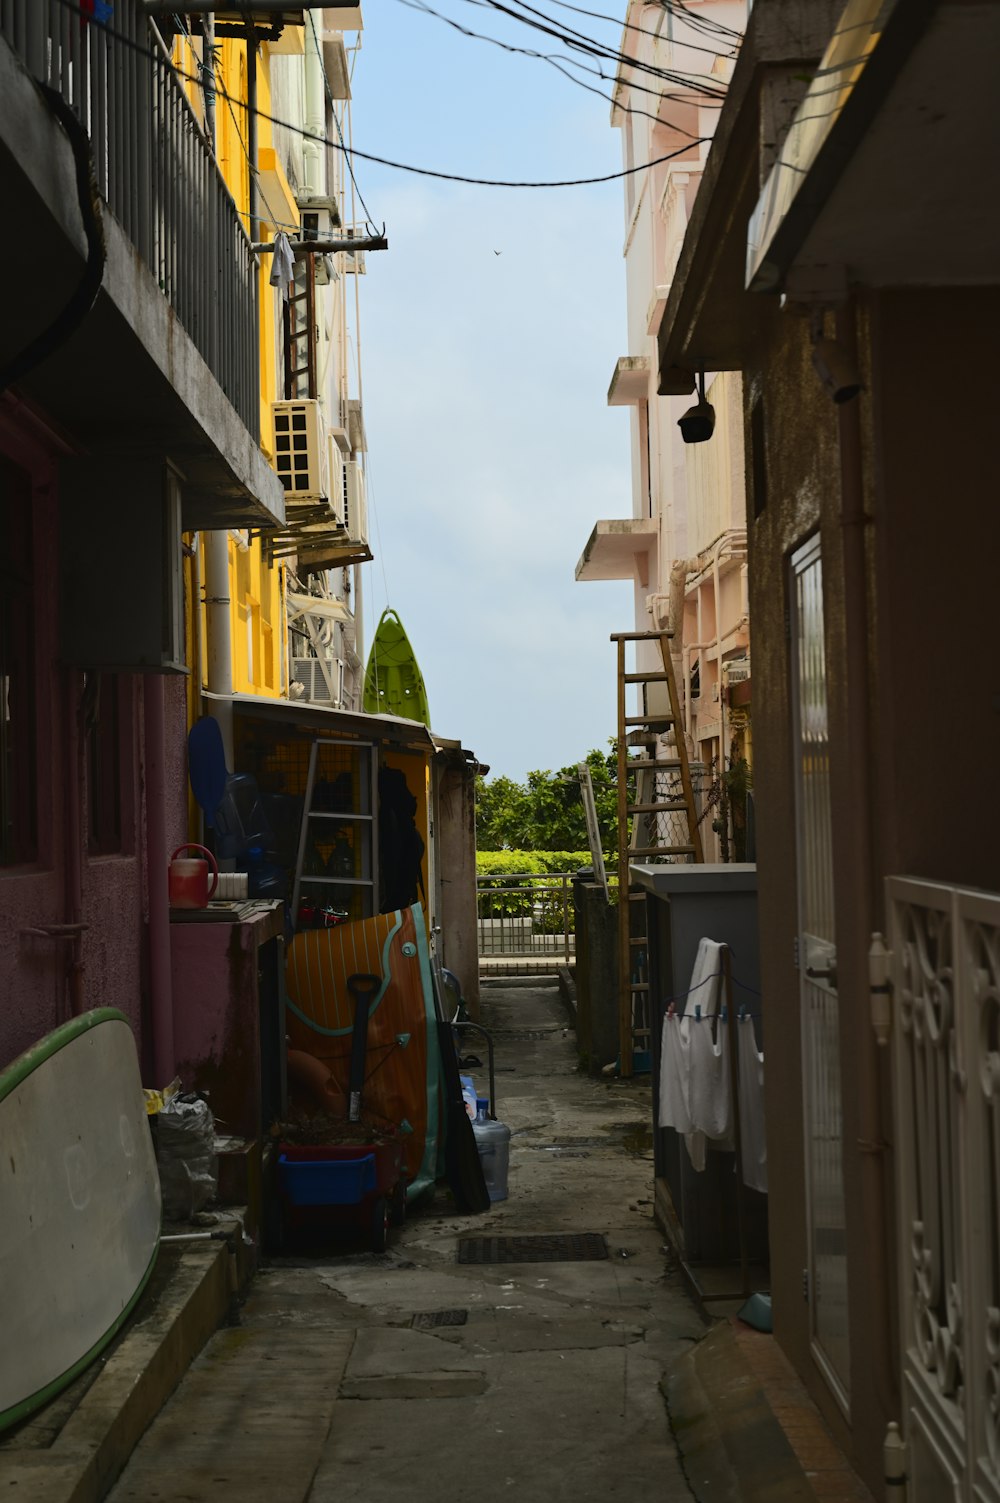 a narrow alley way with a surfboard and other items